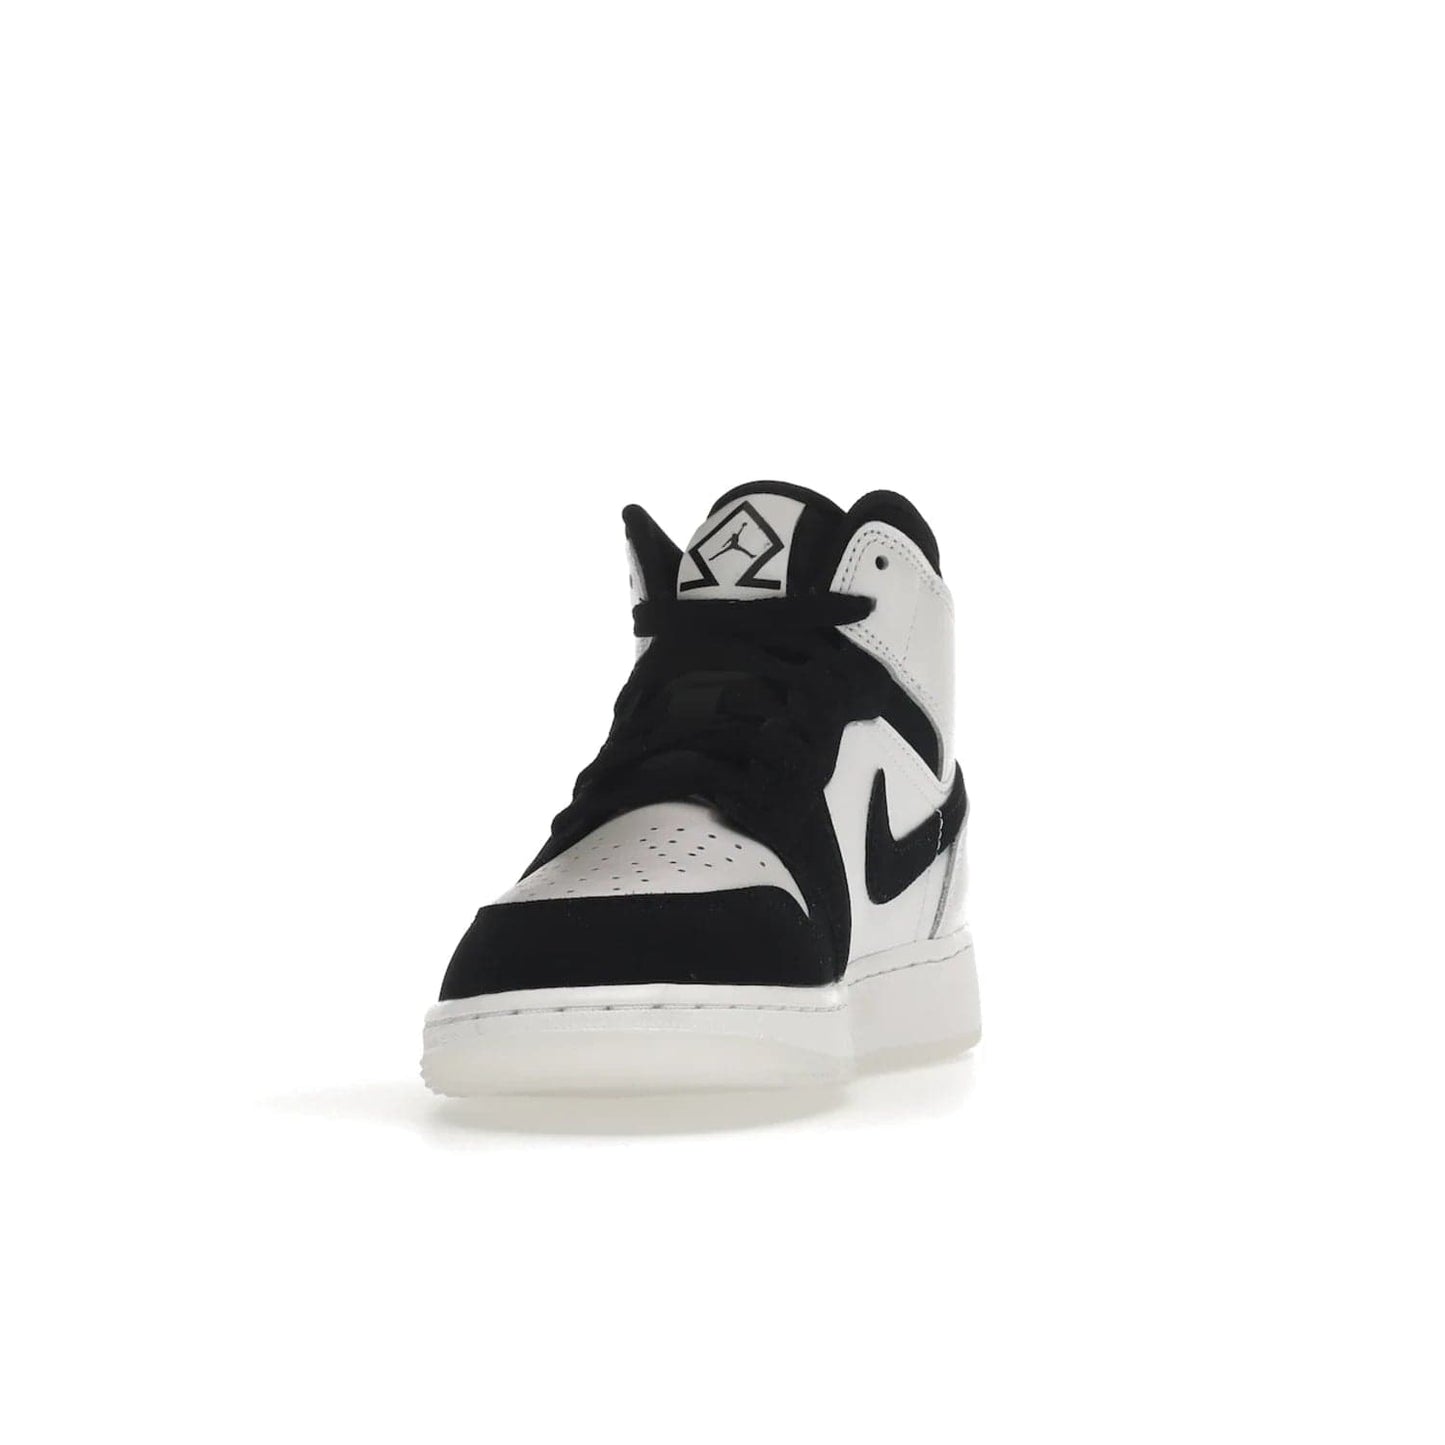 Jordan 1 Mid Diamond Shorts (GS) - Image 12 - Only at www.BallersClubKickz.com - Get the Jordan 1 Mid Diamond Shorts GS on 9th Feb 2022! Features a white, black & suede design with nylon tongue, stamped wings logo, rubber midsole & outsole. Only $100!